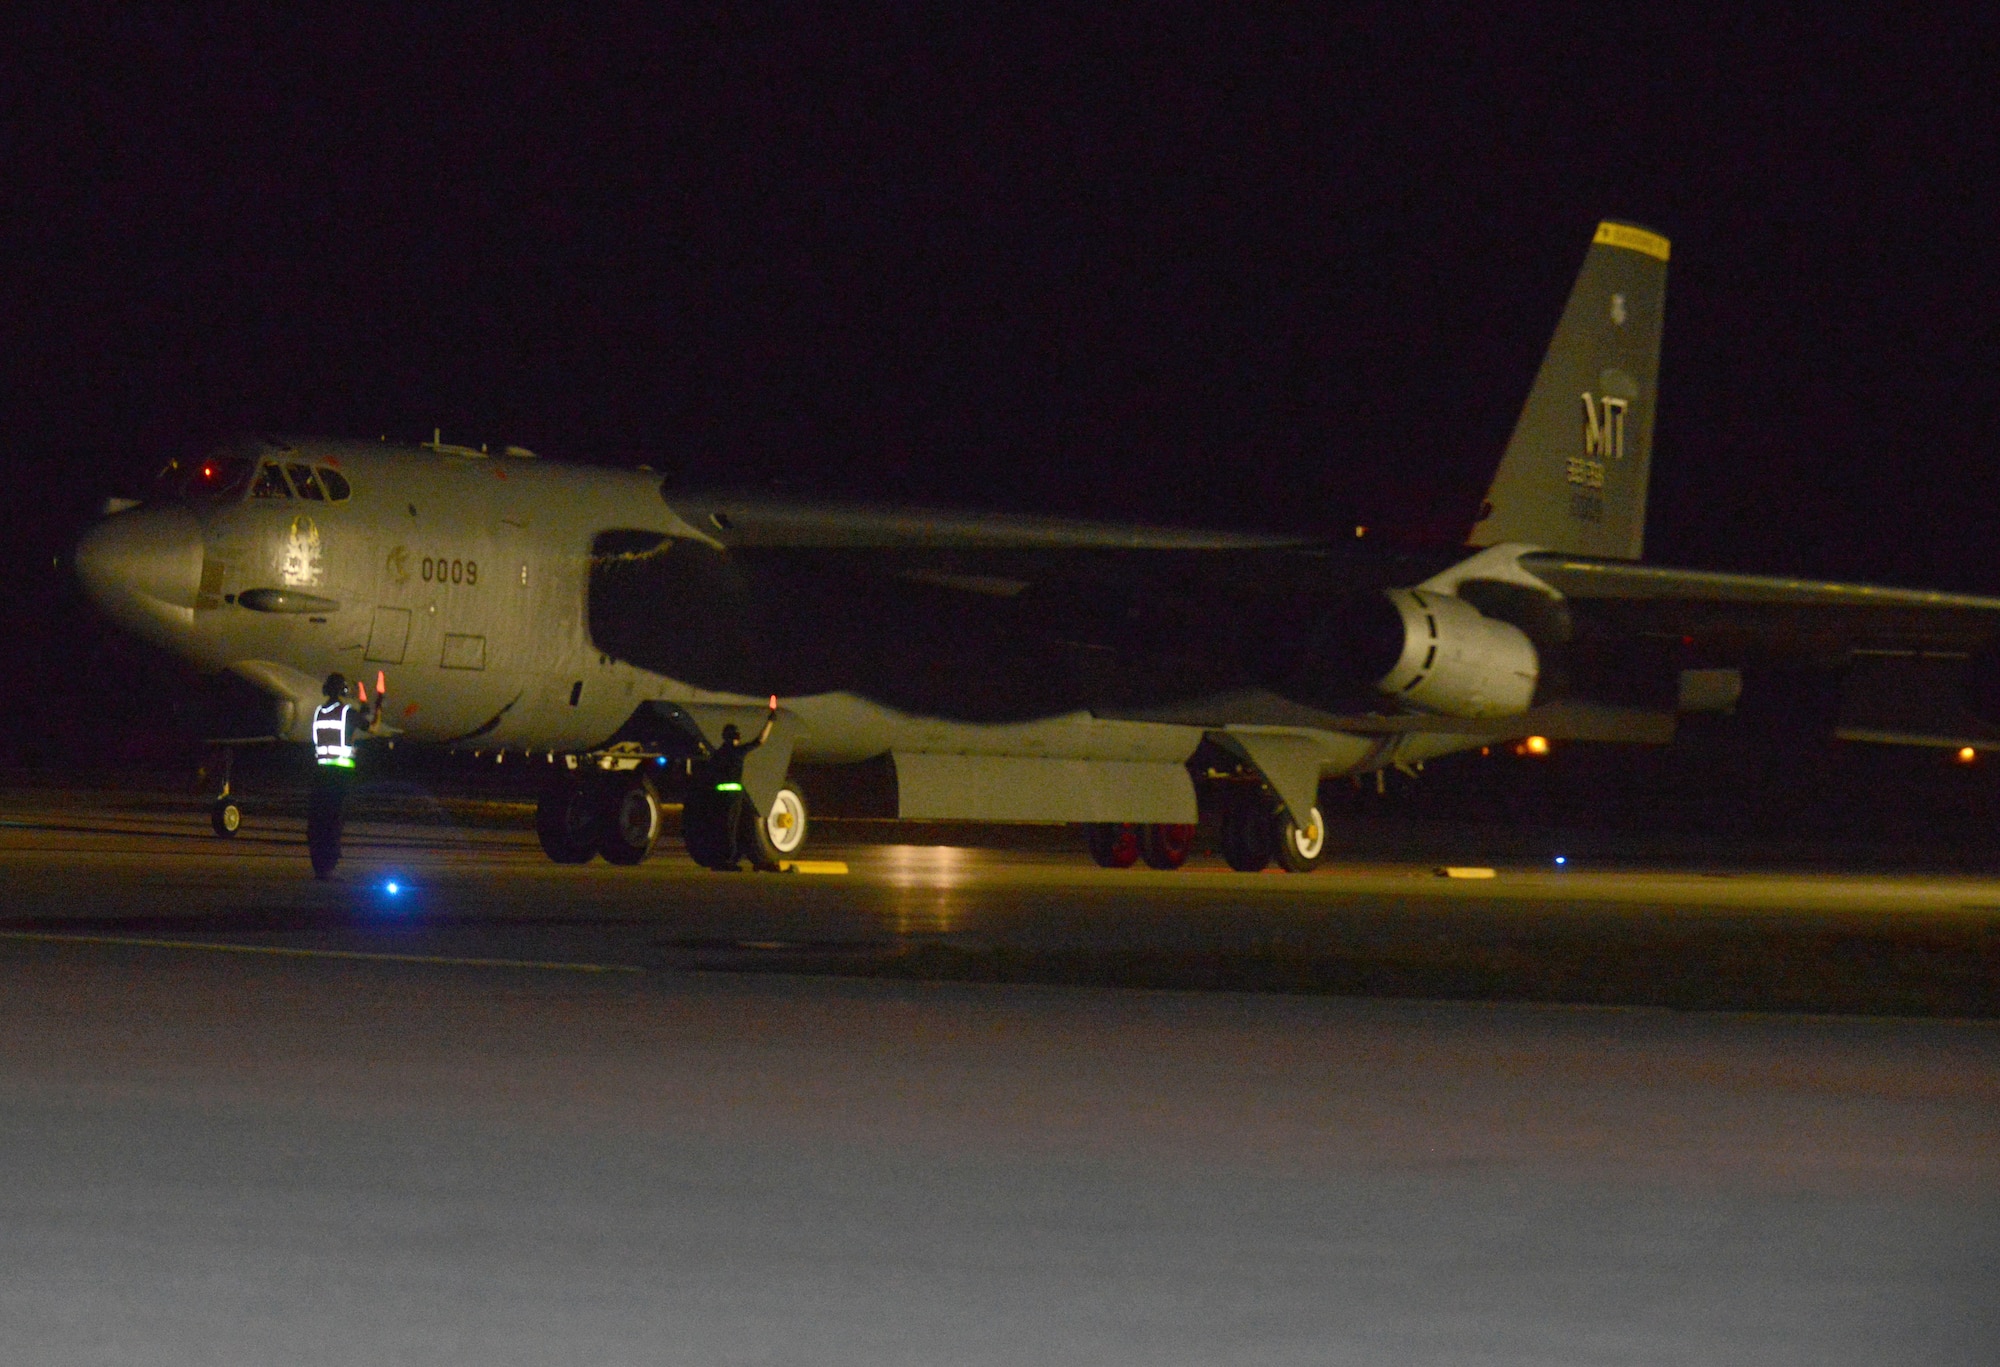 A B-52 Stratofortress from the 69th Expeditionary Bomb Squadron, deployed from Minot Air Force Base, N.D., lands March 2, 2016, at Andersen Air Force Base, Guam. A new rotation of aircrews, maintenance personnel and aircraft assigned to the 69th EBS arrived on Guam to replace the 23rd EBS in support of the U.S. Pacific Command’s continuous bomber presence mission. (U.S. Air Force photo/Airman 1st Class Arielle Vasquez)